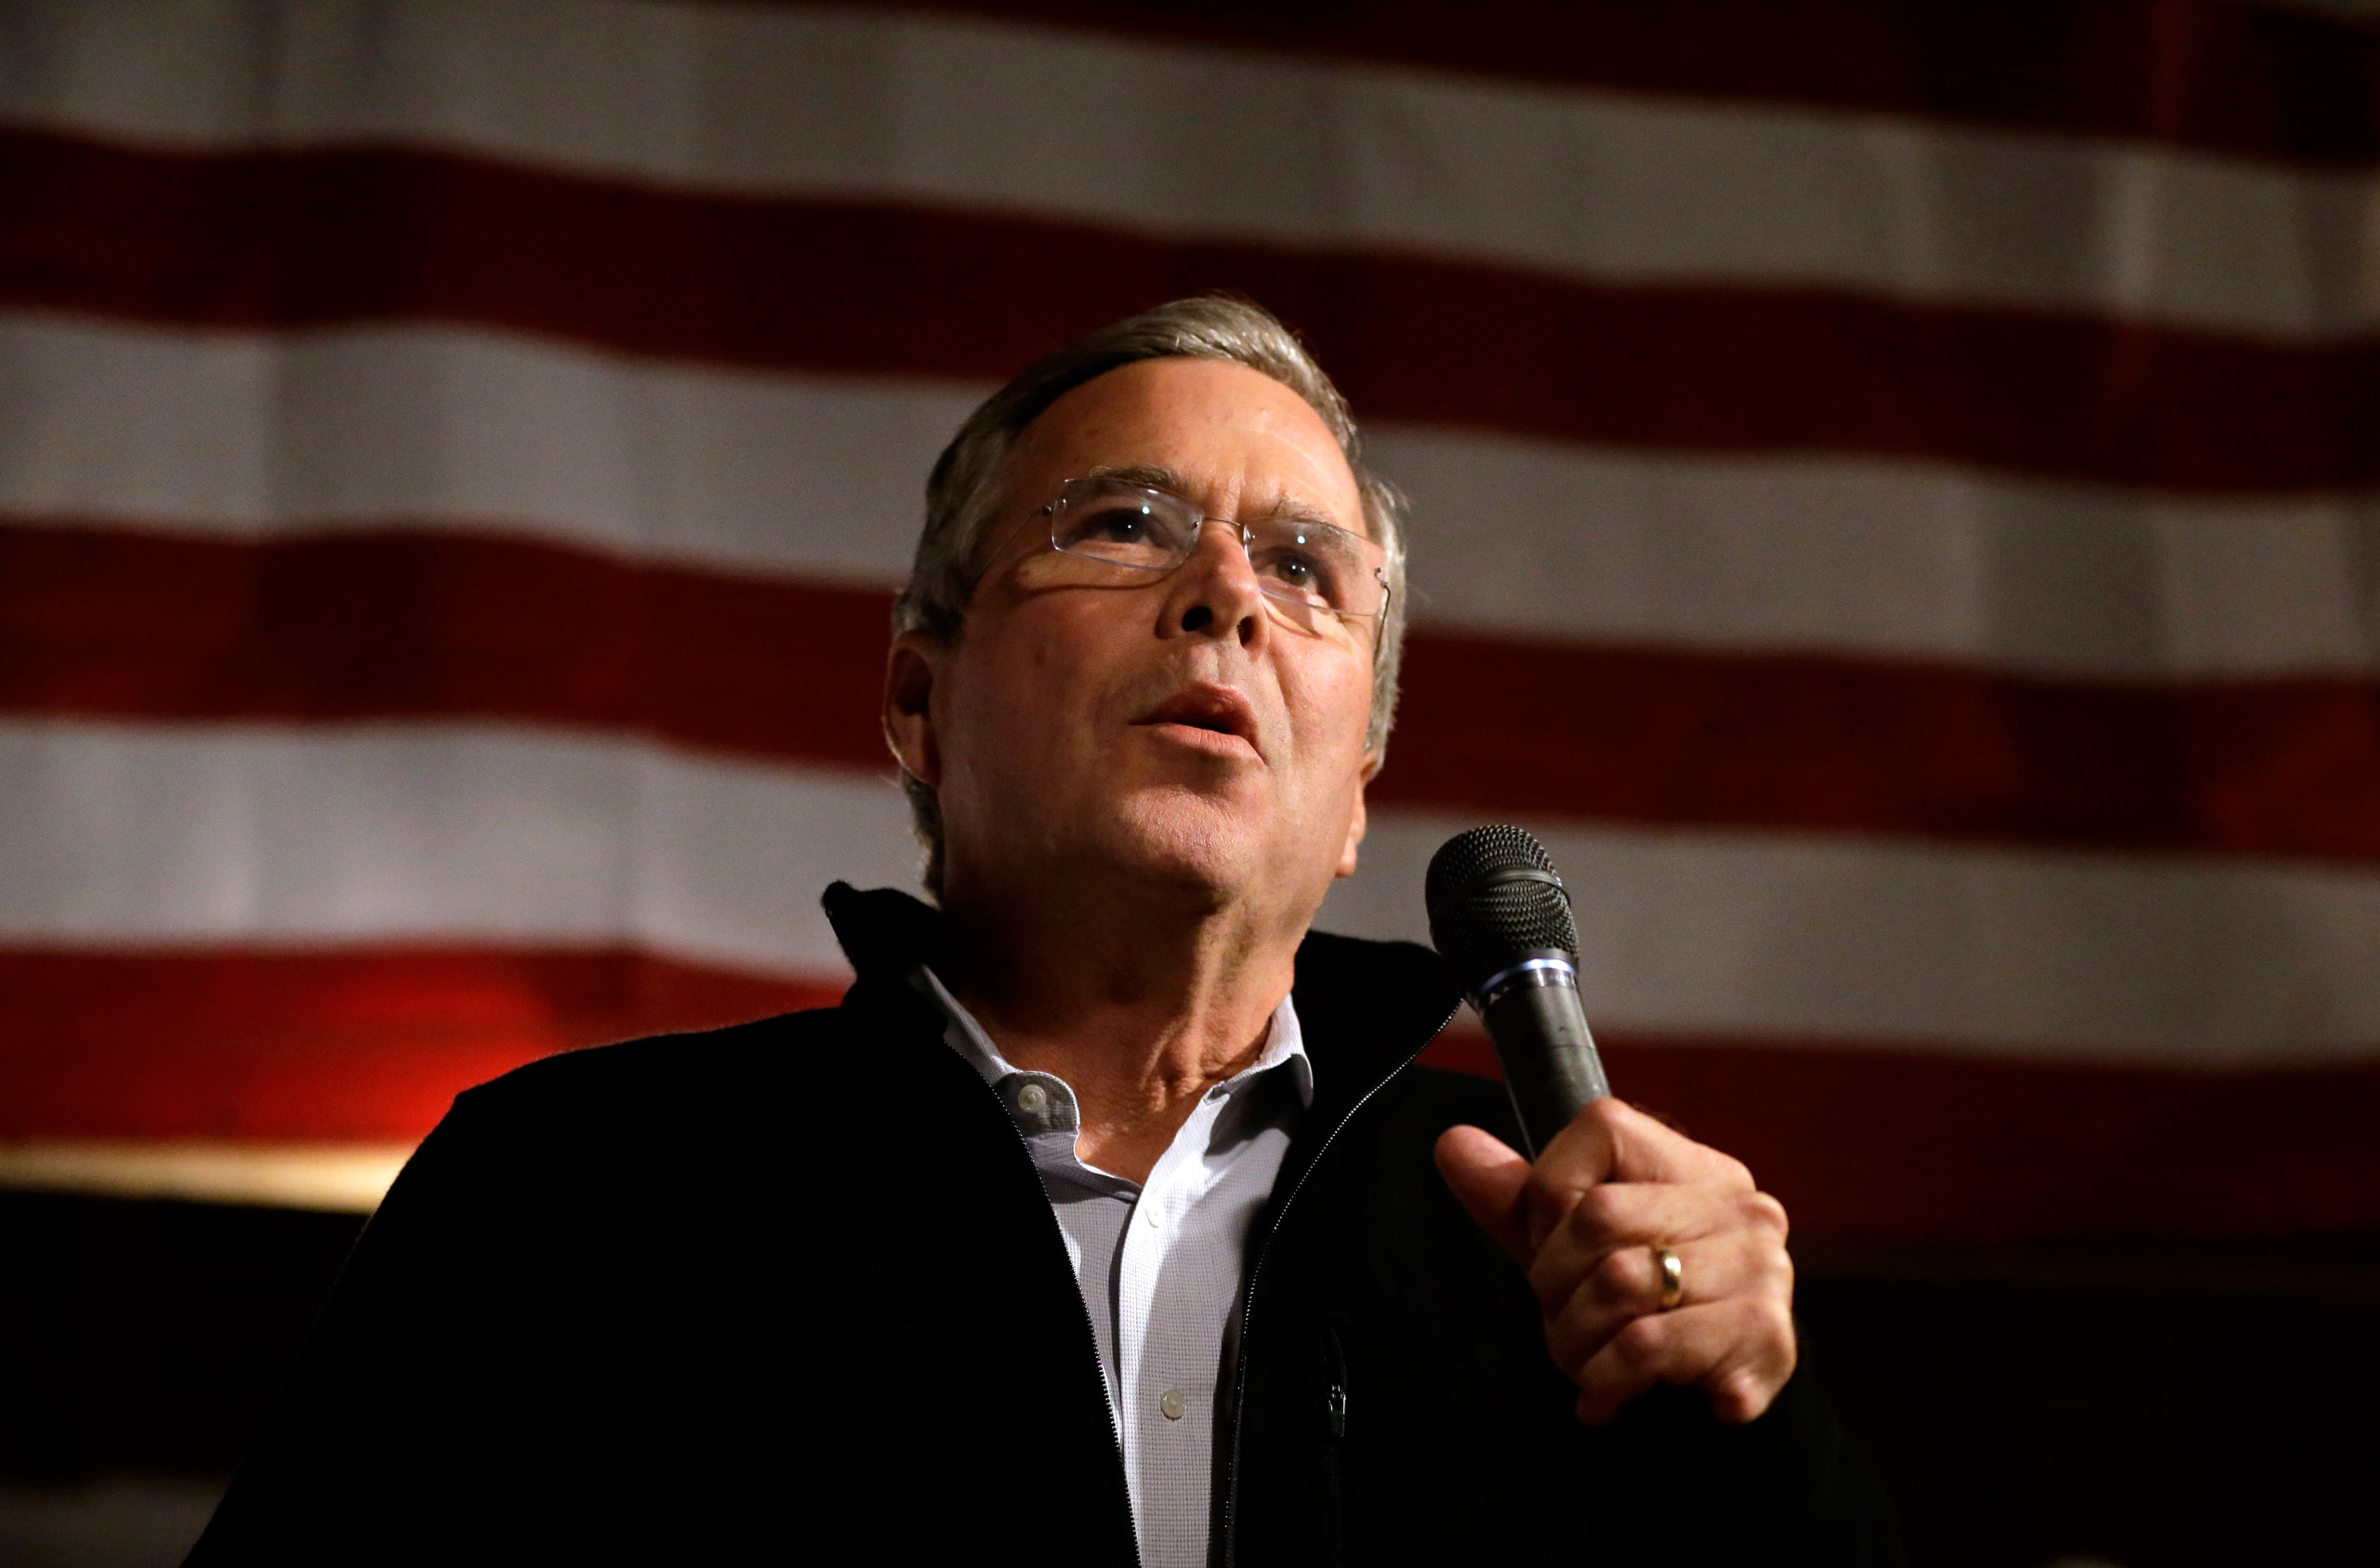 Republican presidential candidate, former Florida Gov. Jeb Bush, addresses an audience at a campaign event held in a barn belonging to former Sen. Scott Brown, R-Mass., Tuesday, Nov. 3, 2015, in Rye, N.H. (AP Photo/Steven Senne)